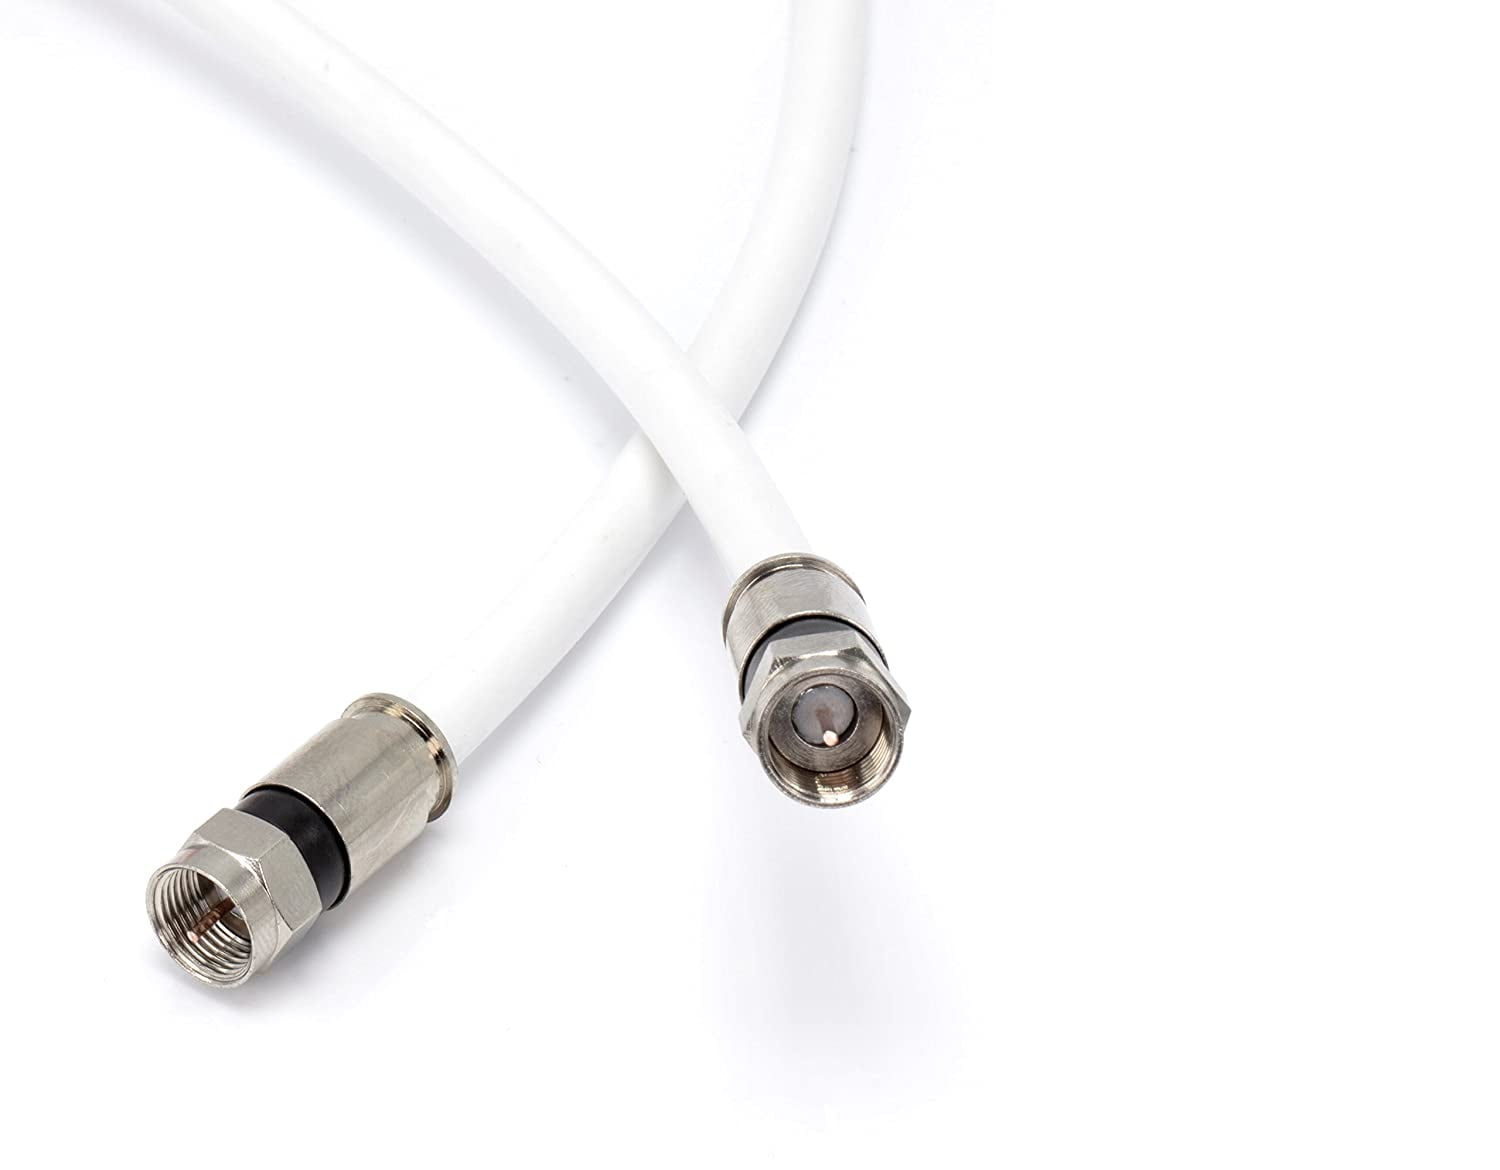 How to Unscrew a Coaxial Cable From Audiovisual Equipment